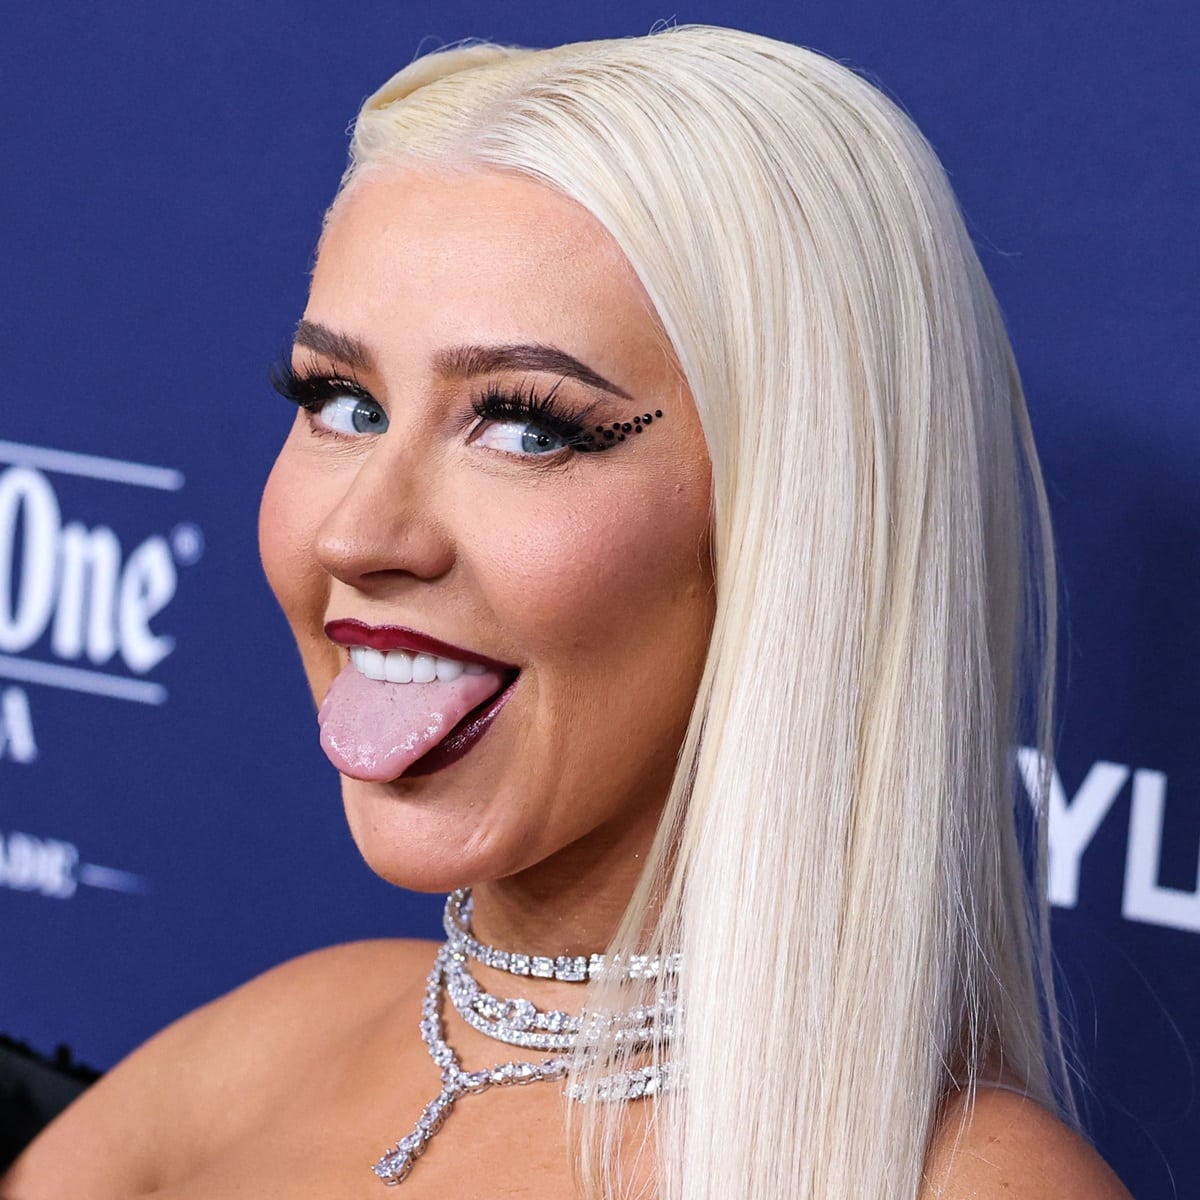 Christina Aguilera shows off her tongue at the GLAAD Media Awards with bold berry-red lips and thick winged eyeliner perfectly complemented her ensemble